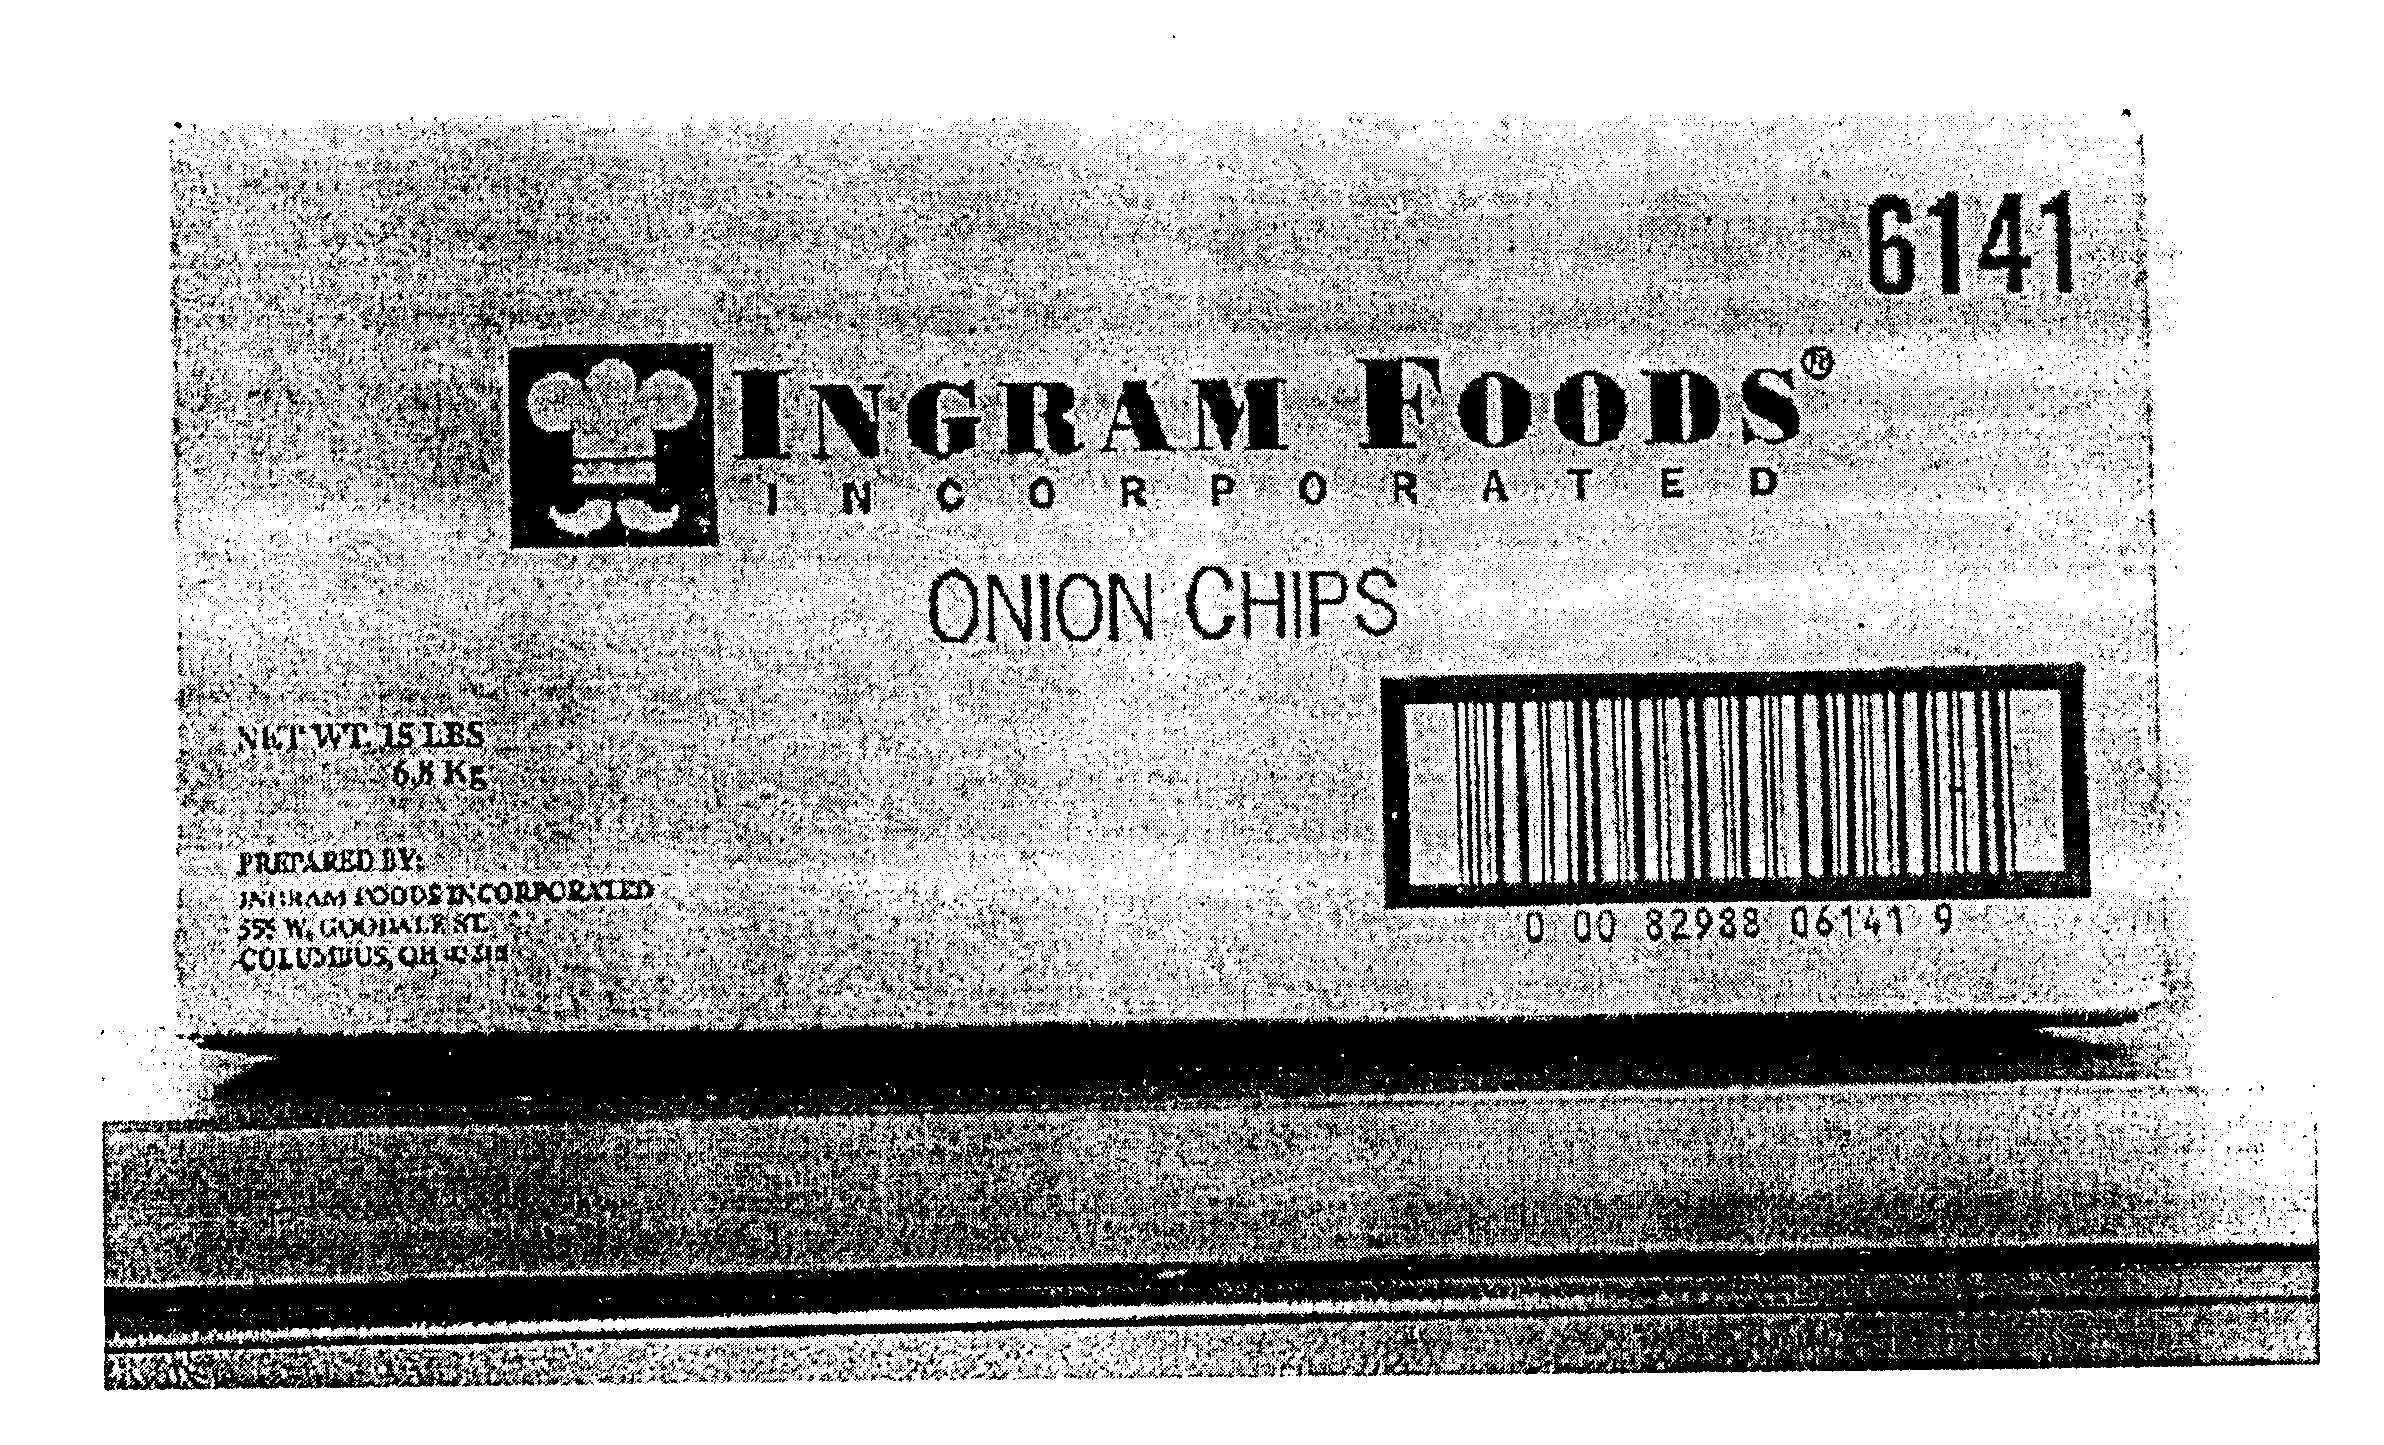  INGRAM FOODS INCORPORATED ONION CHIPS 6141